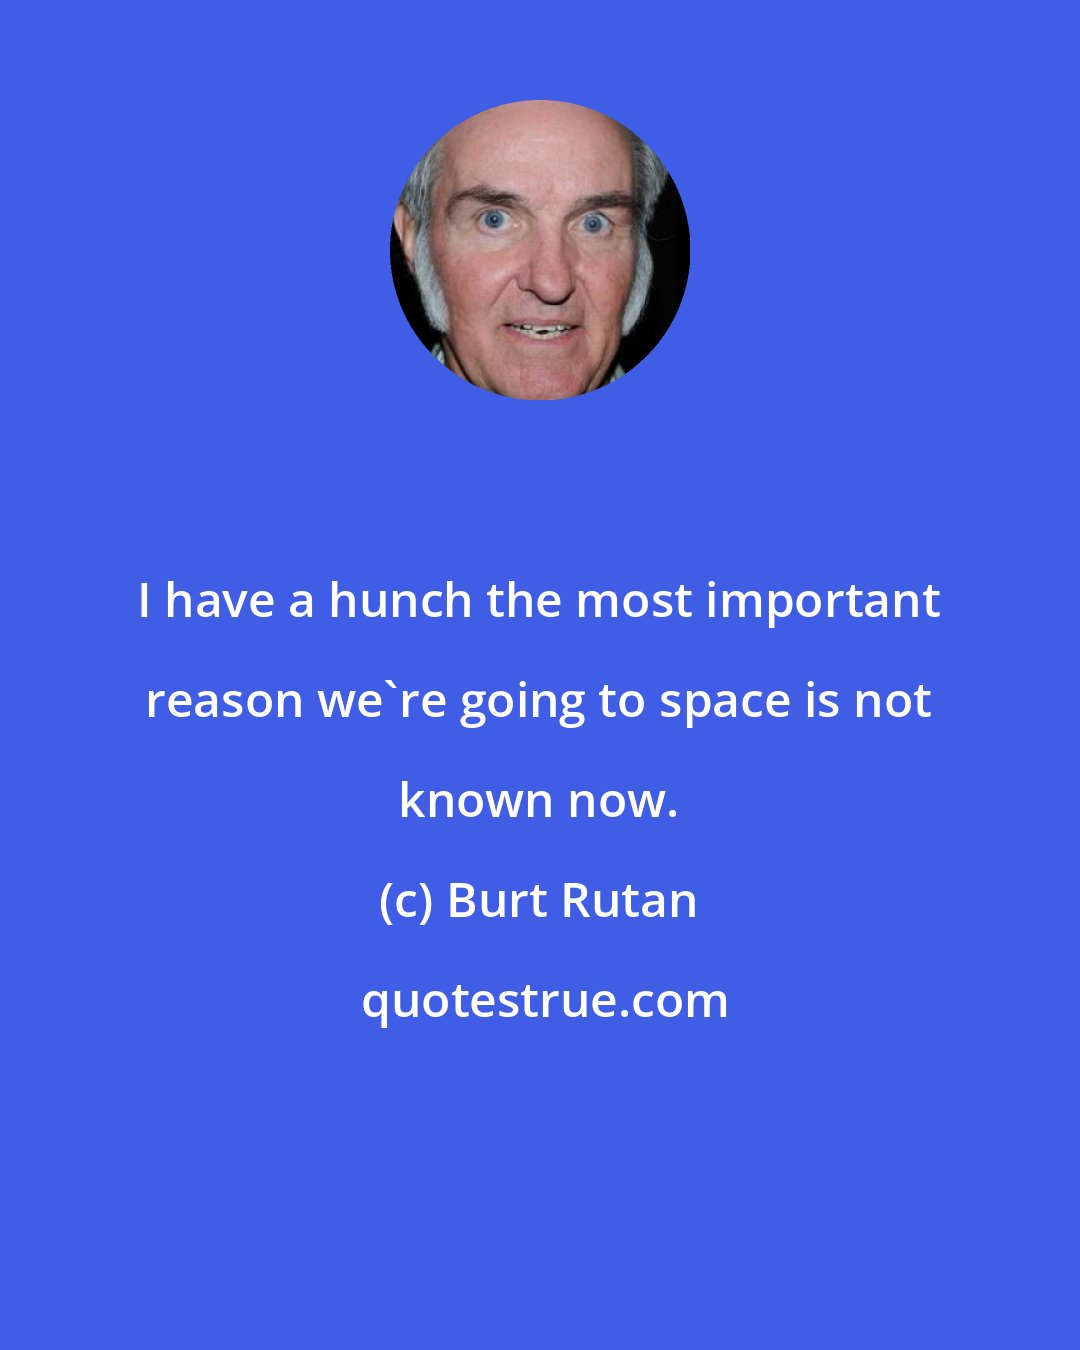 Burt Rutan: I have a hunch the most important reason we're going to space is not known now.